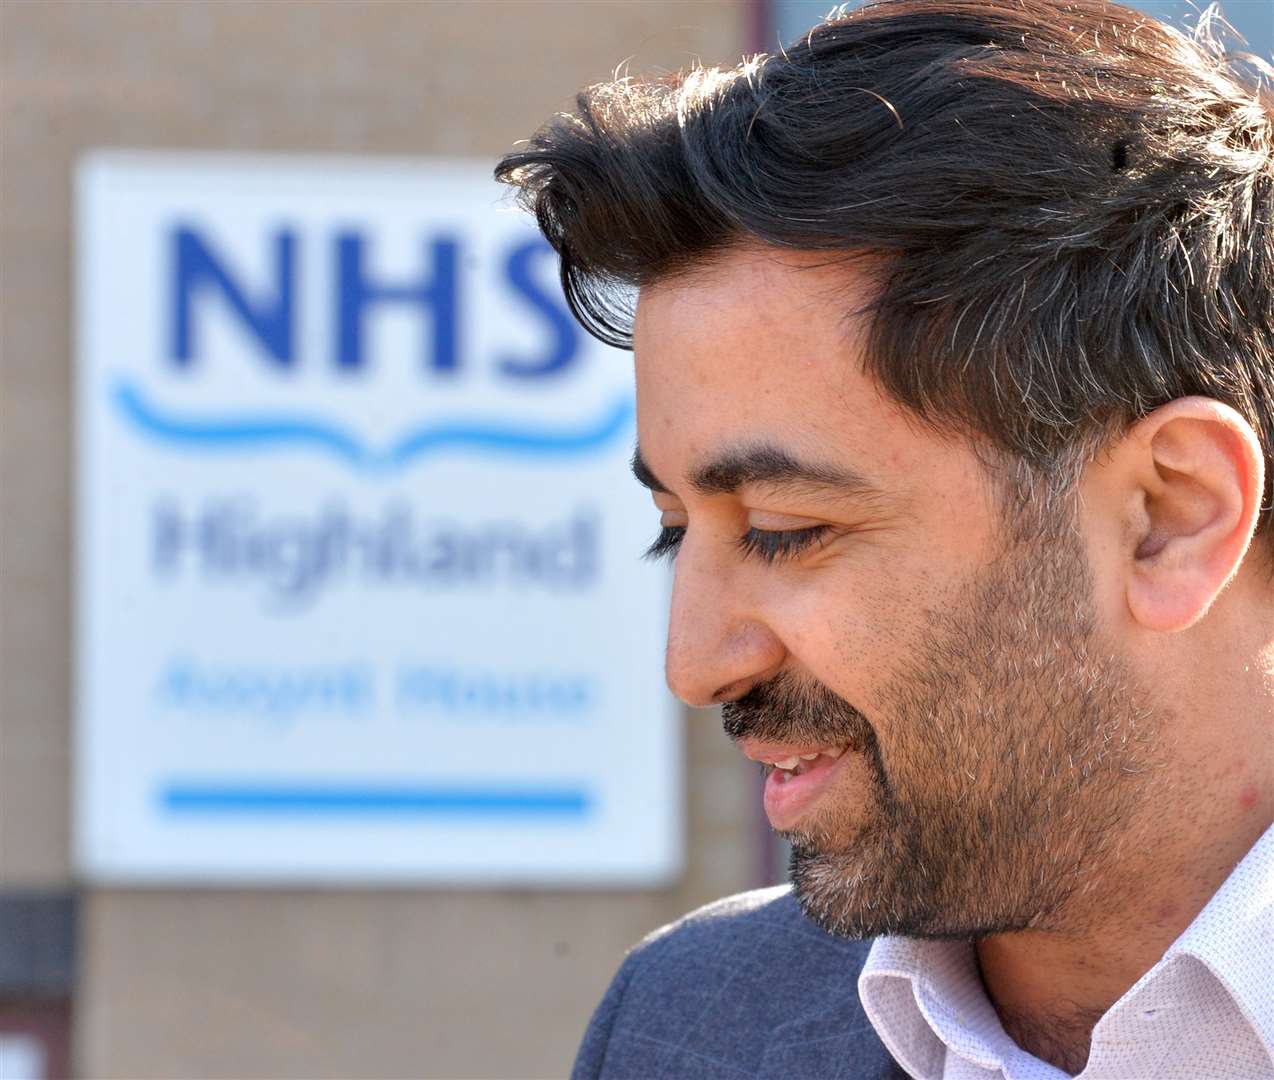 Health Secretary Humza Yousaf will hear about maternity and other health concerns during visit. Picture Gary Anthony.